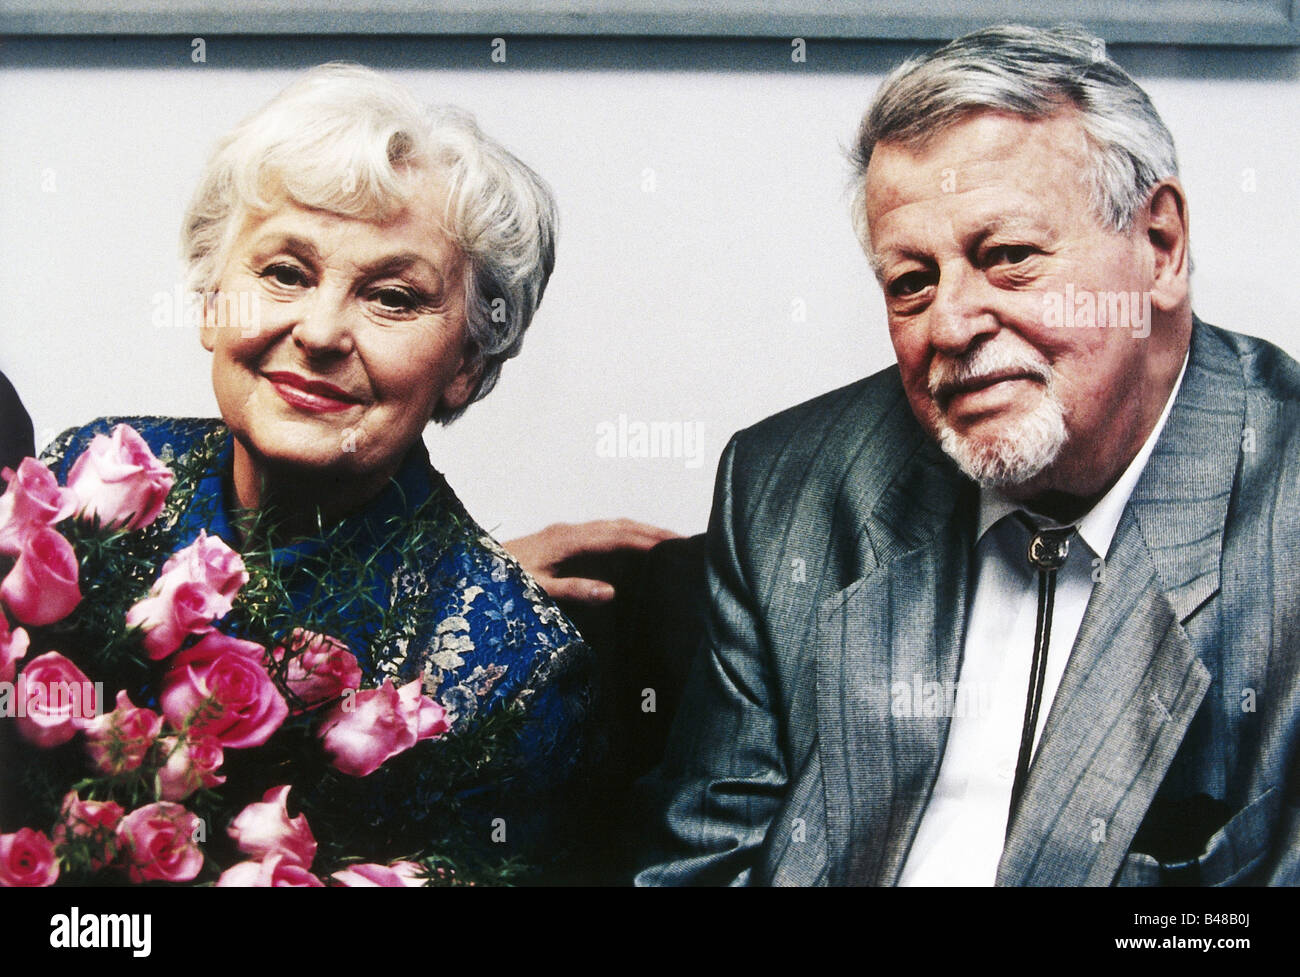 Löbel, Bruni, 20.12.1920 - 27.09.2006, German actress, portrait, with husband, Holger Hagen, at 75th birthday party, 19.12.1995, Stock Photo